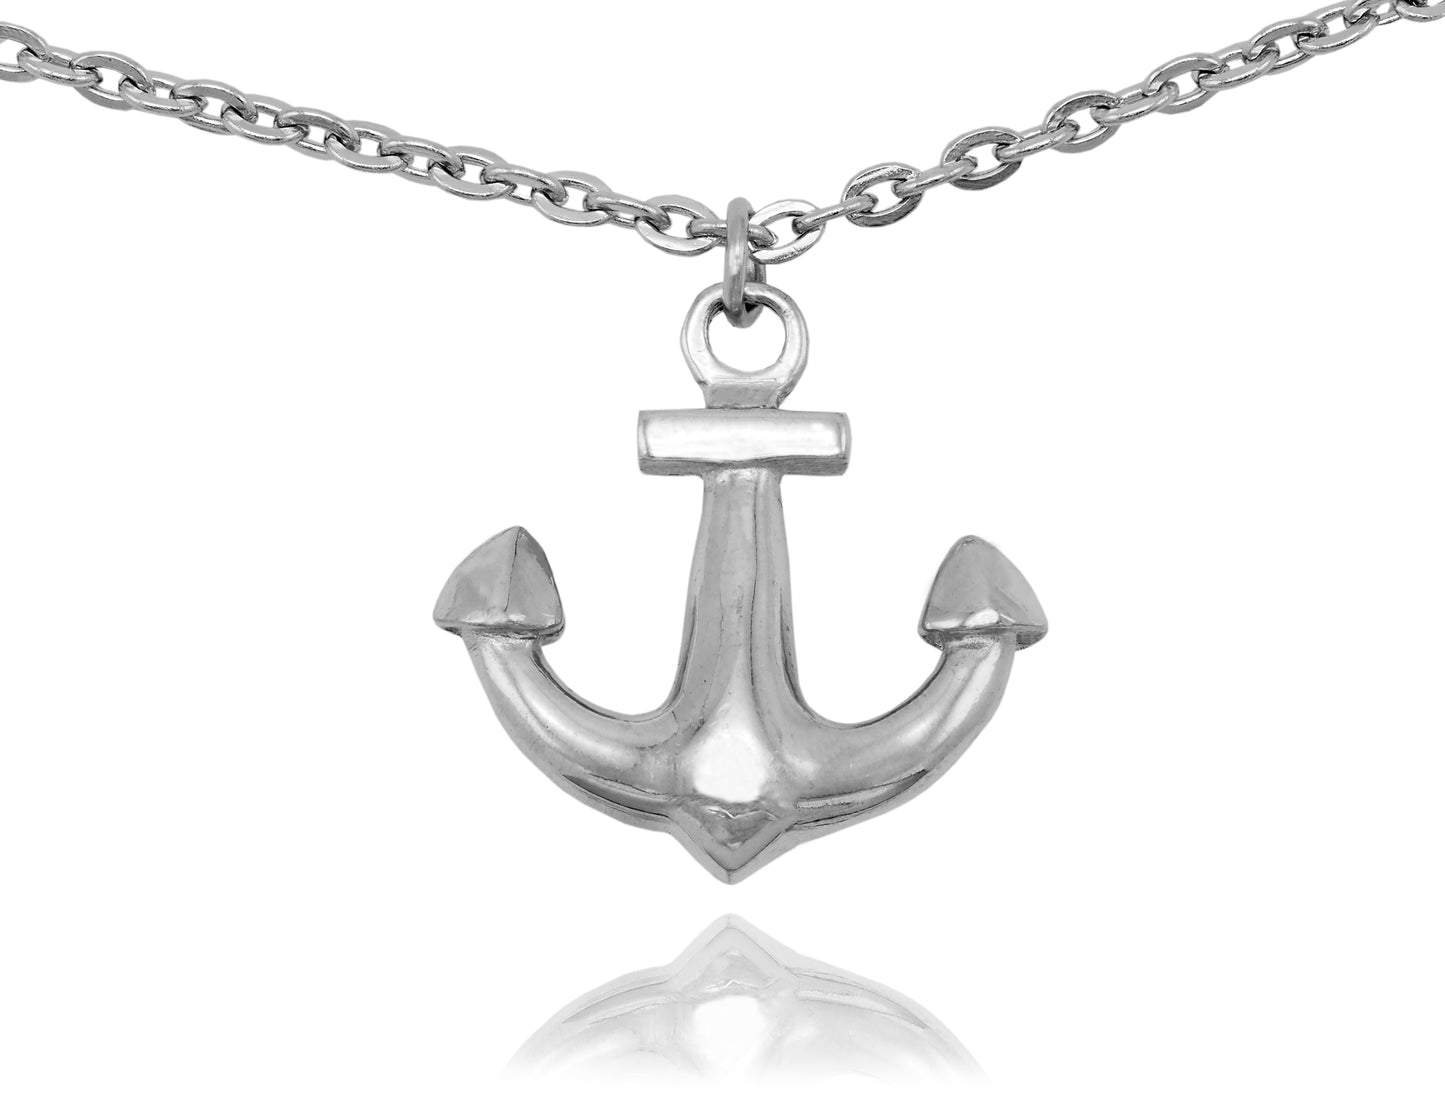 Quinnlyn & Co. Anchor Pendant Necklace, Religious Gifts for Women with Inspirational Quote on Greeting Card